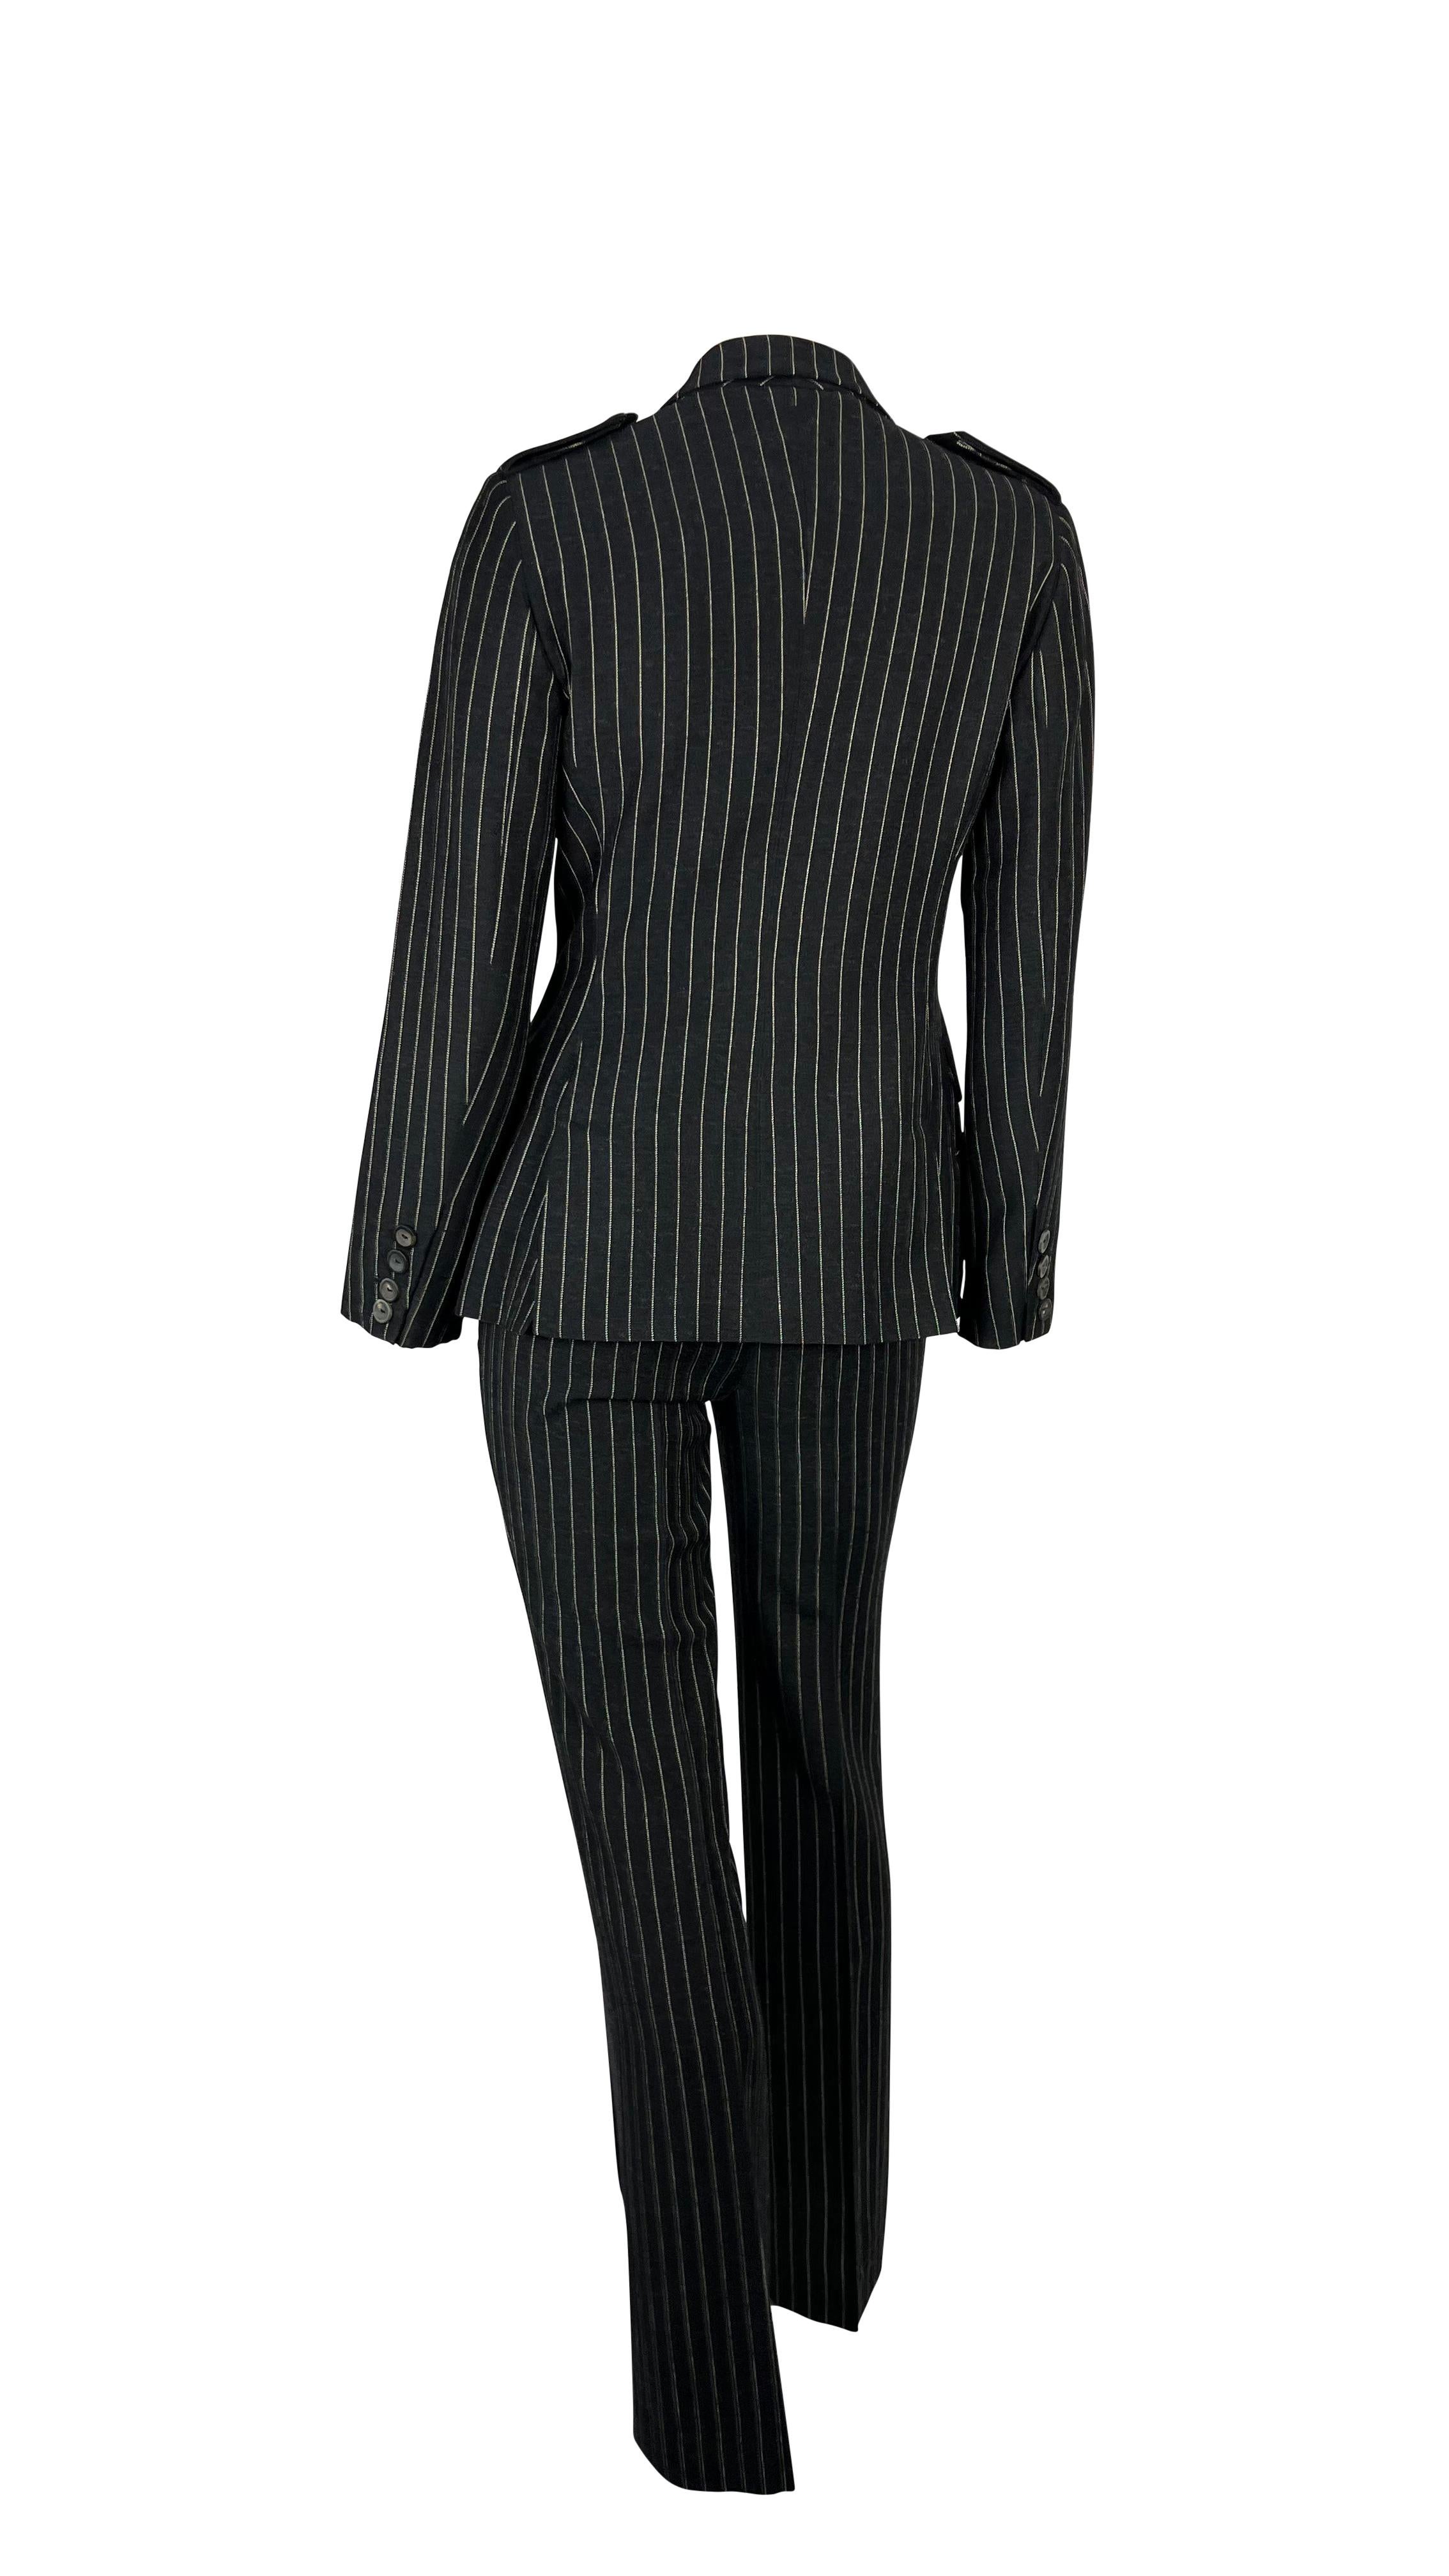 Women's F/W 1996 Gucci by Tom Ford Runway Ad Black Wool Pinstripe Epaulet Pant Suit For Sale